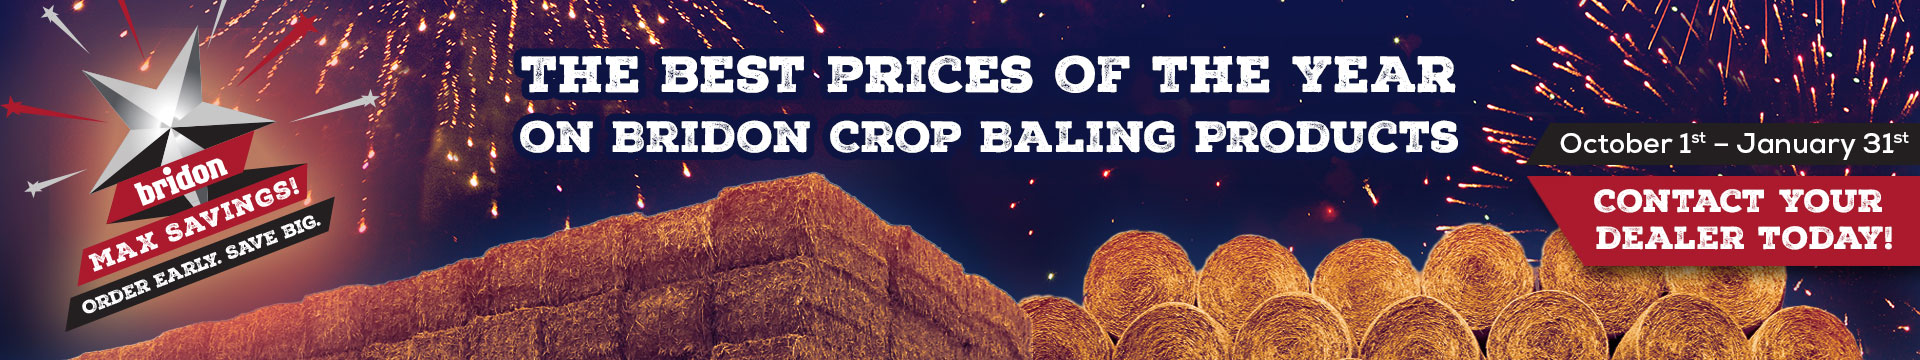 The best prices of the year on bridon crop baling products October 1st - January 31st Contact your dealer today!